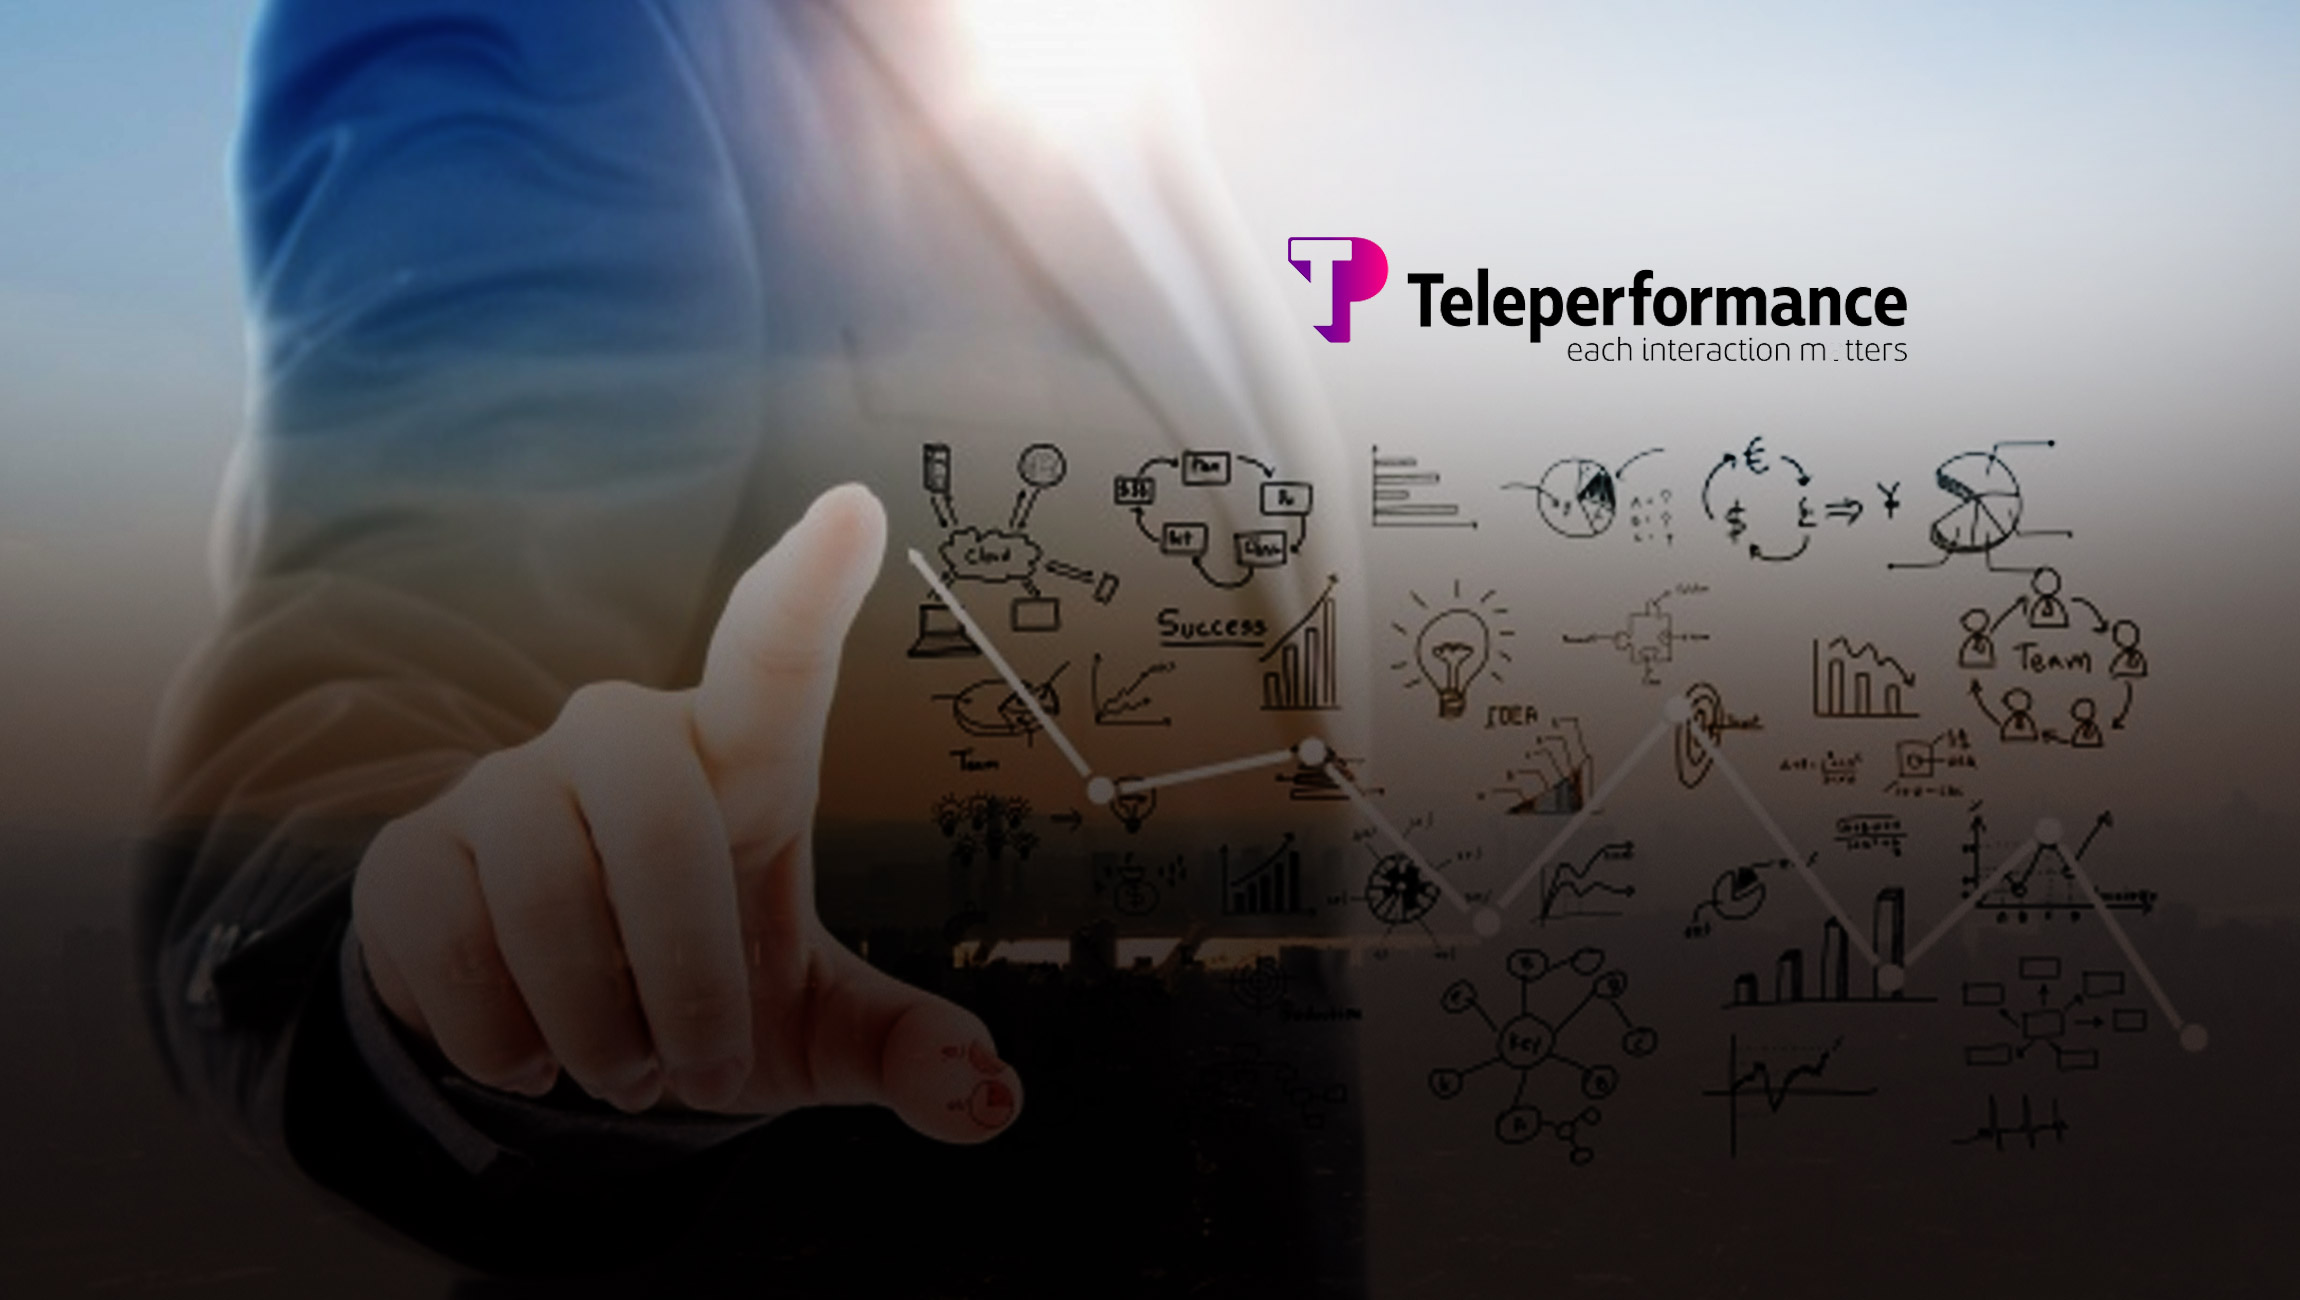 Teleperformance Positioned as a Champion to Support Clients in Australia by Frost & Sullivan